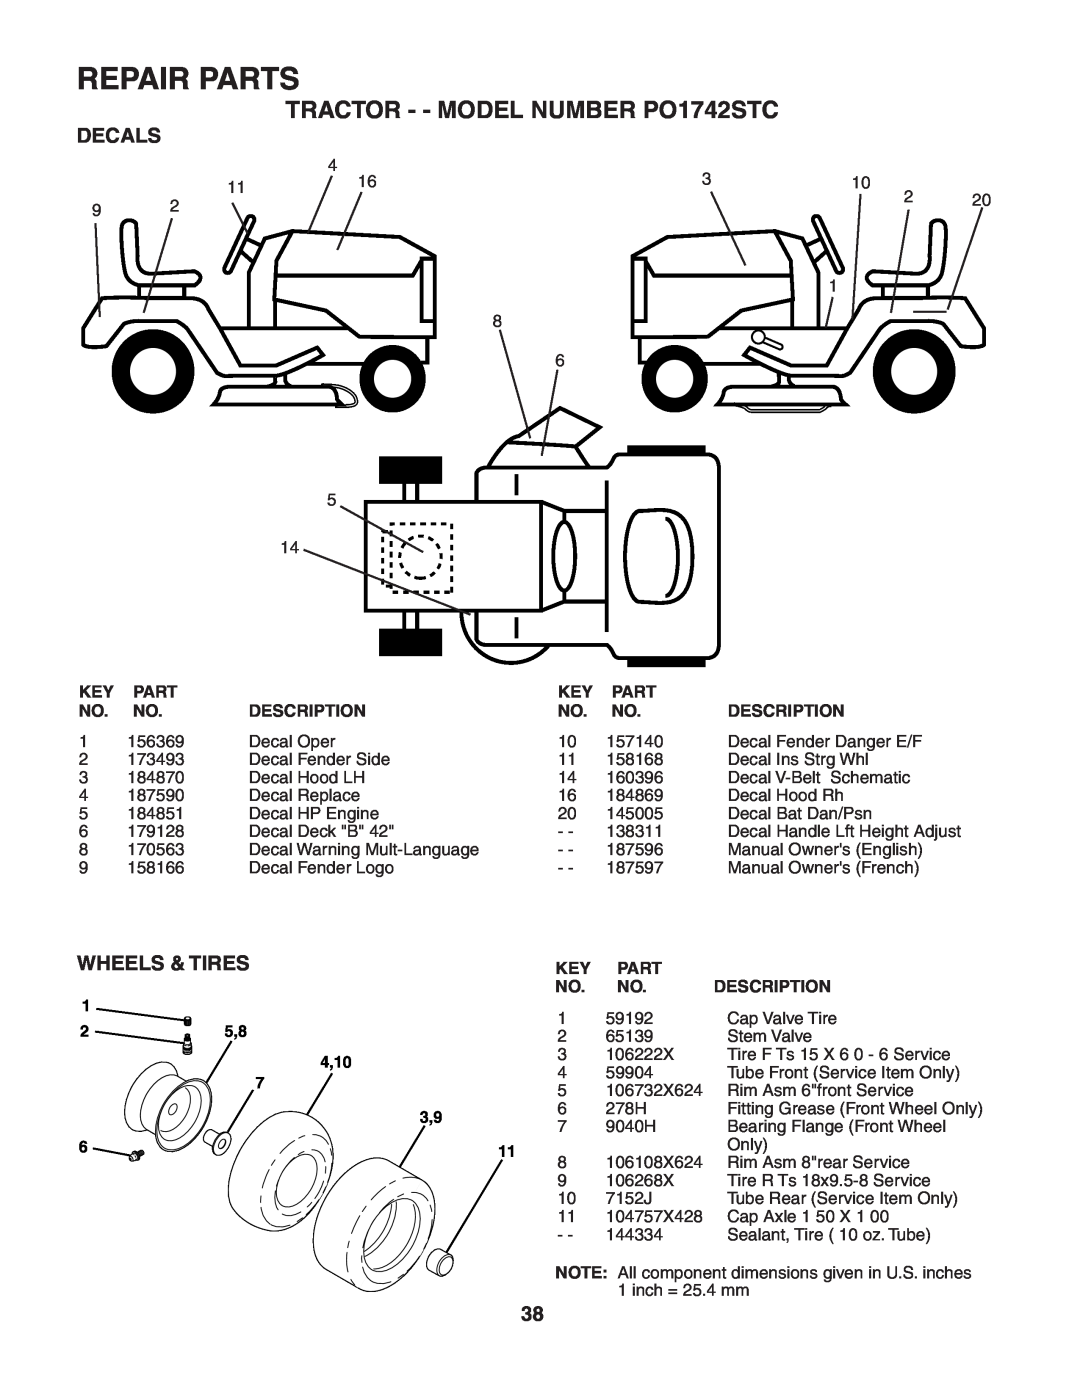 Poulan manual Decals, Wheels & Tires, Repair Parts, TRACTOR - - MODEL NUMBER PO1742STC 